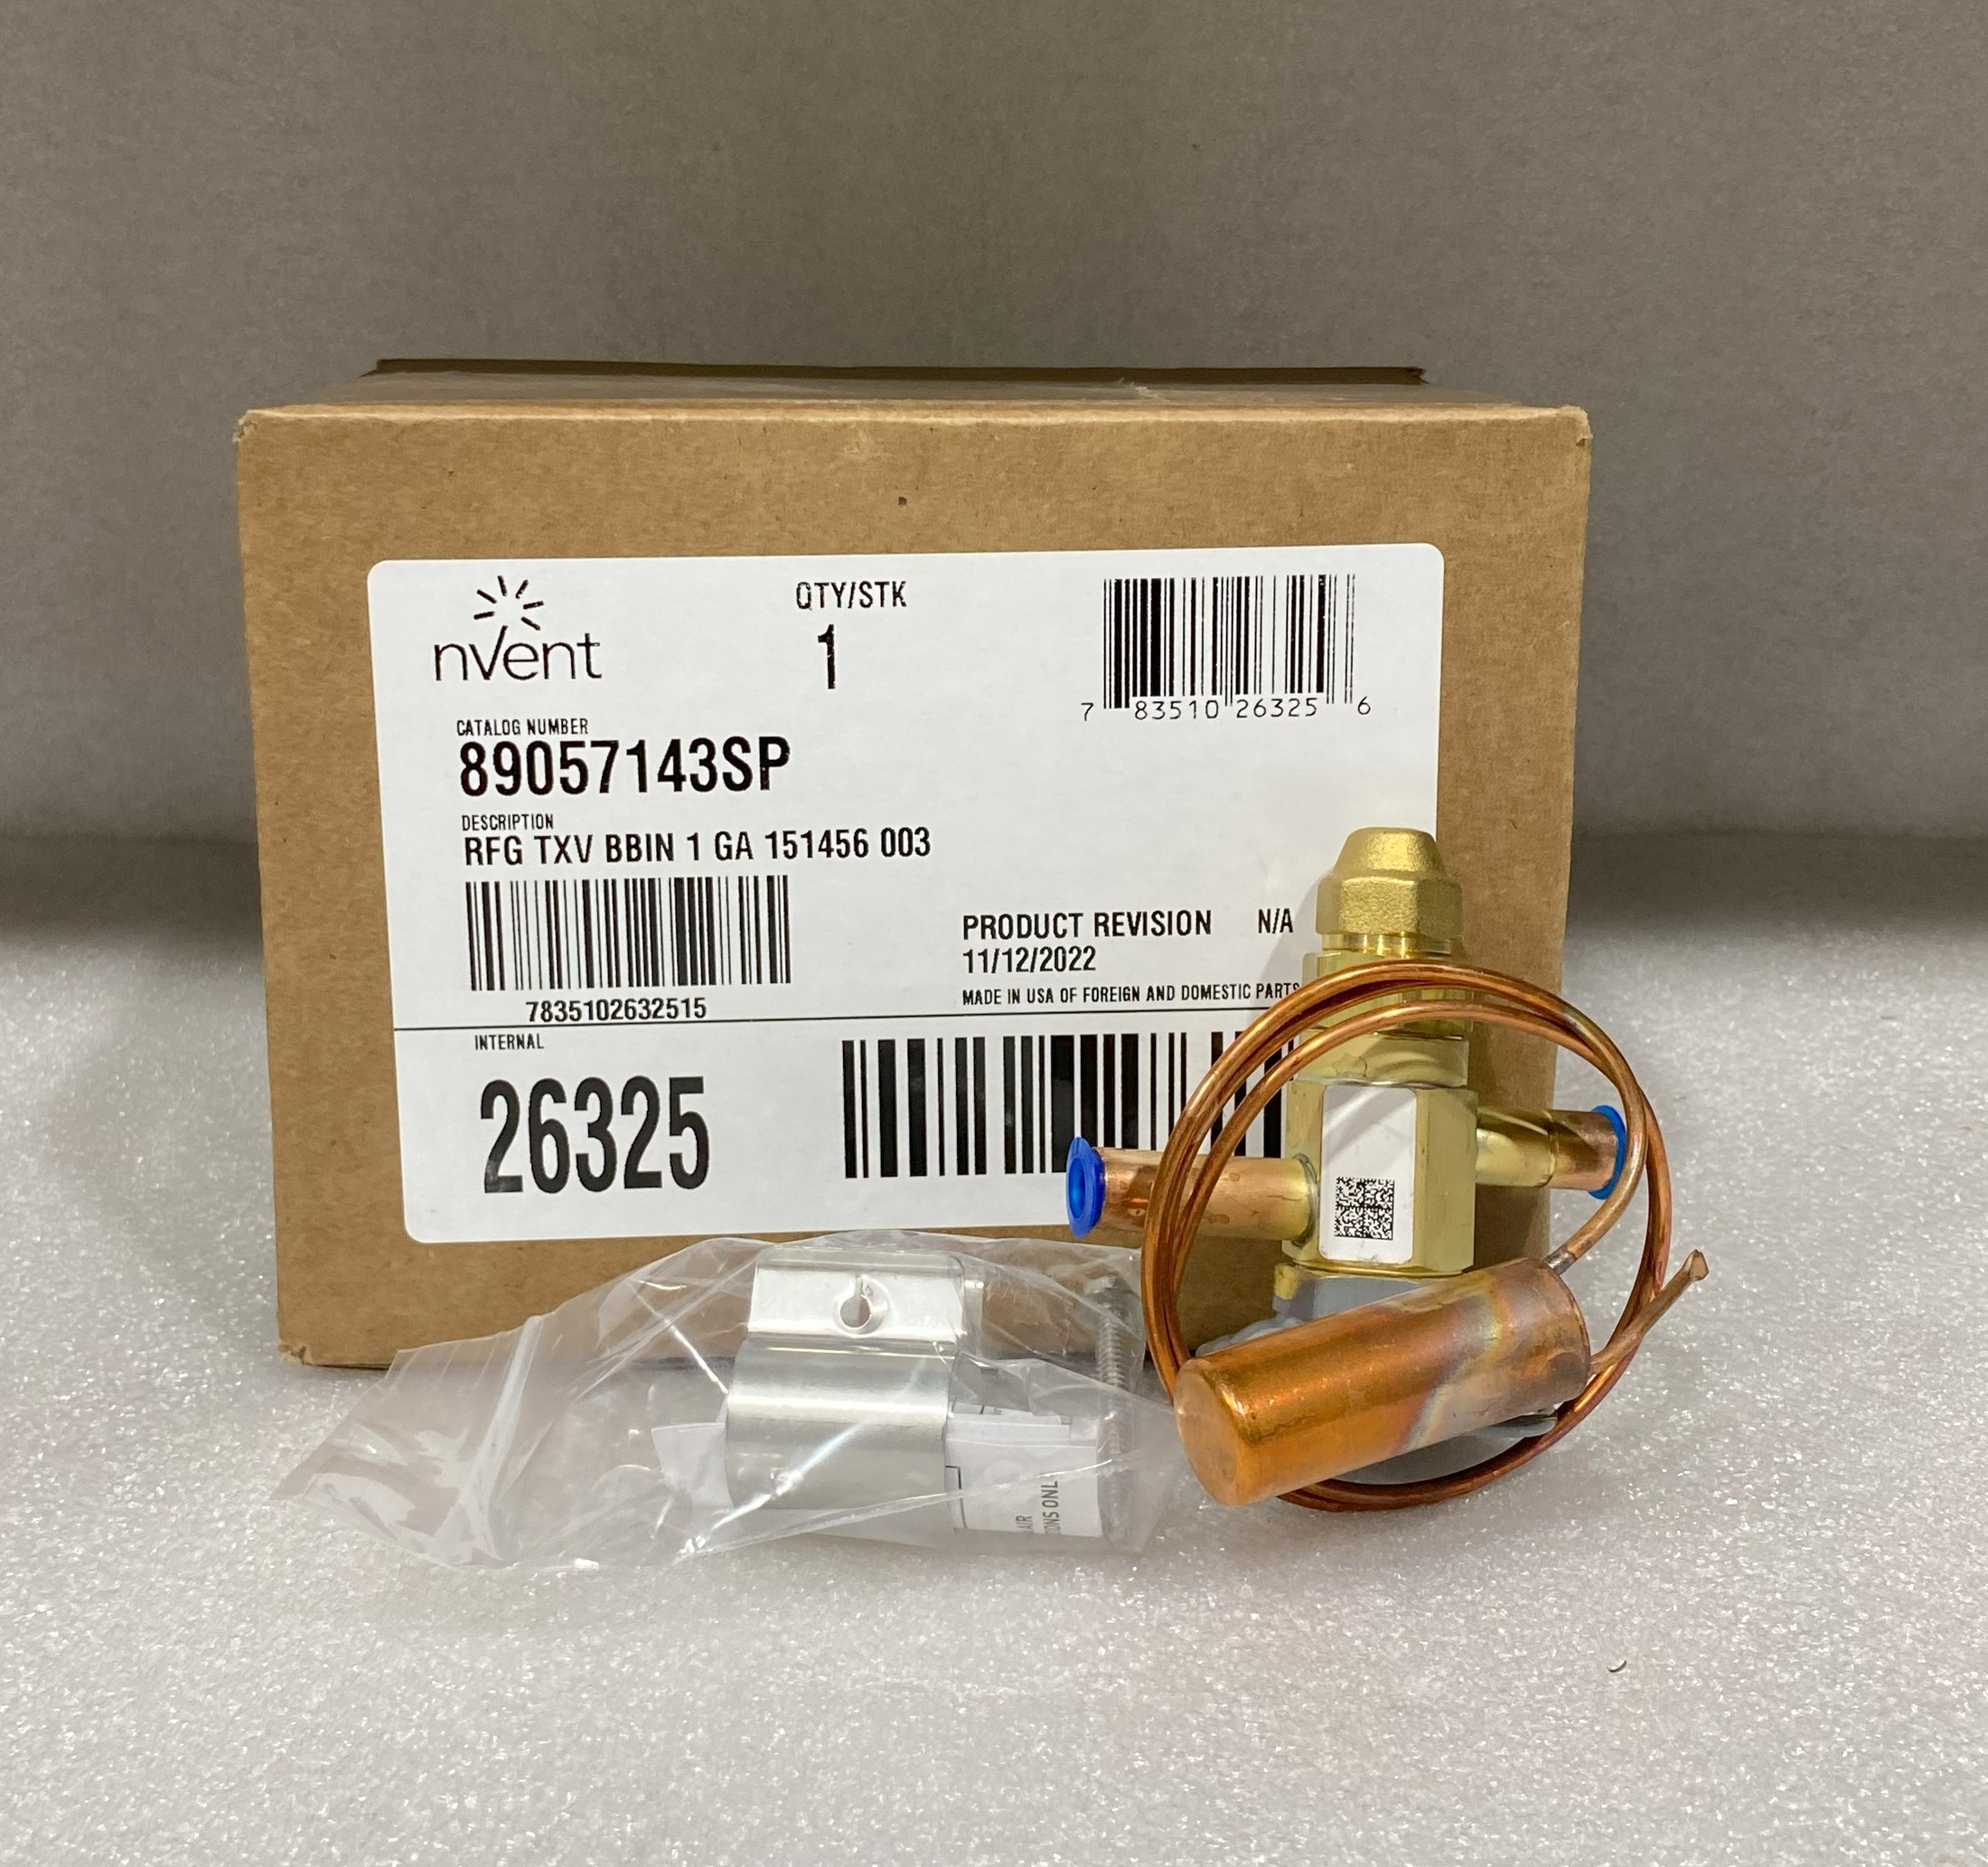 nVent 89057143SP Thermal Expansion Valve